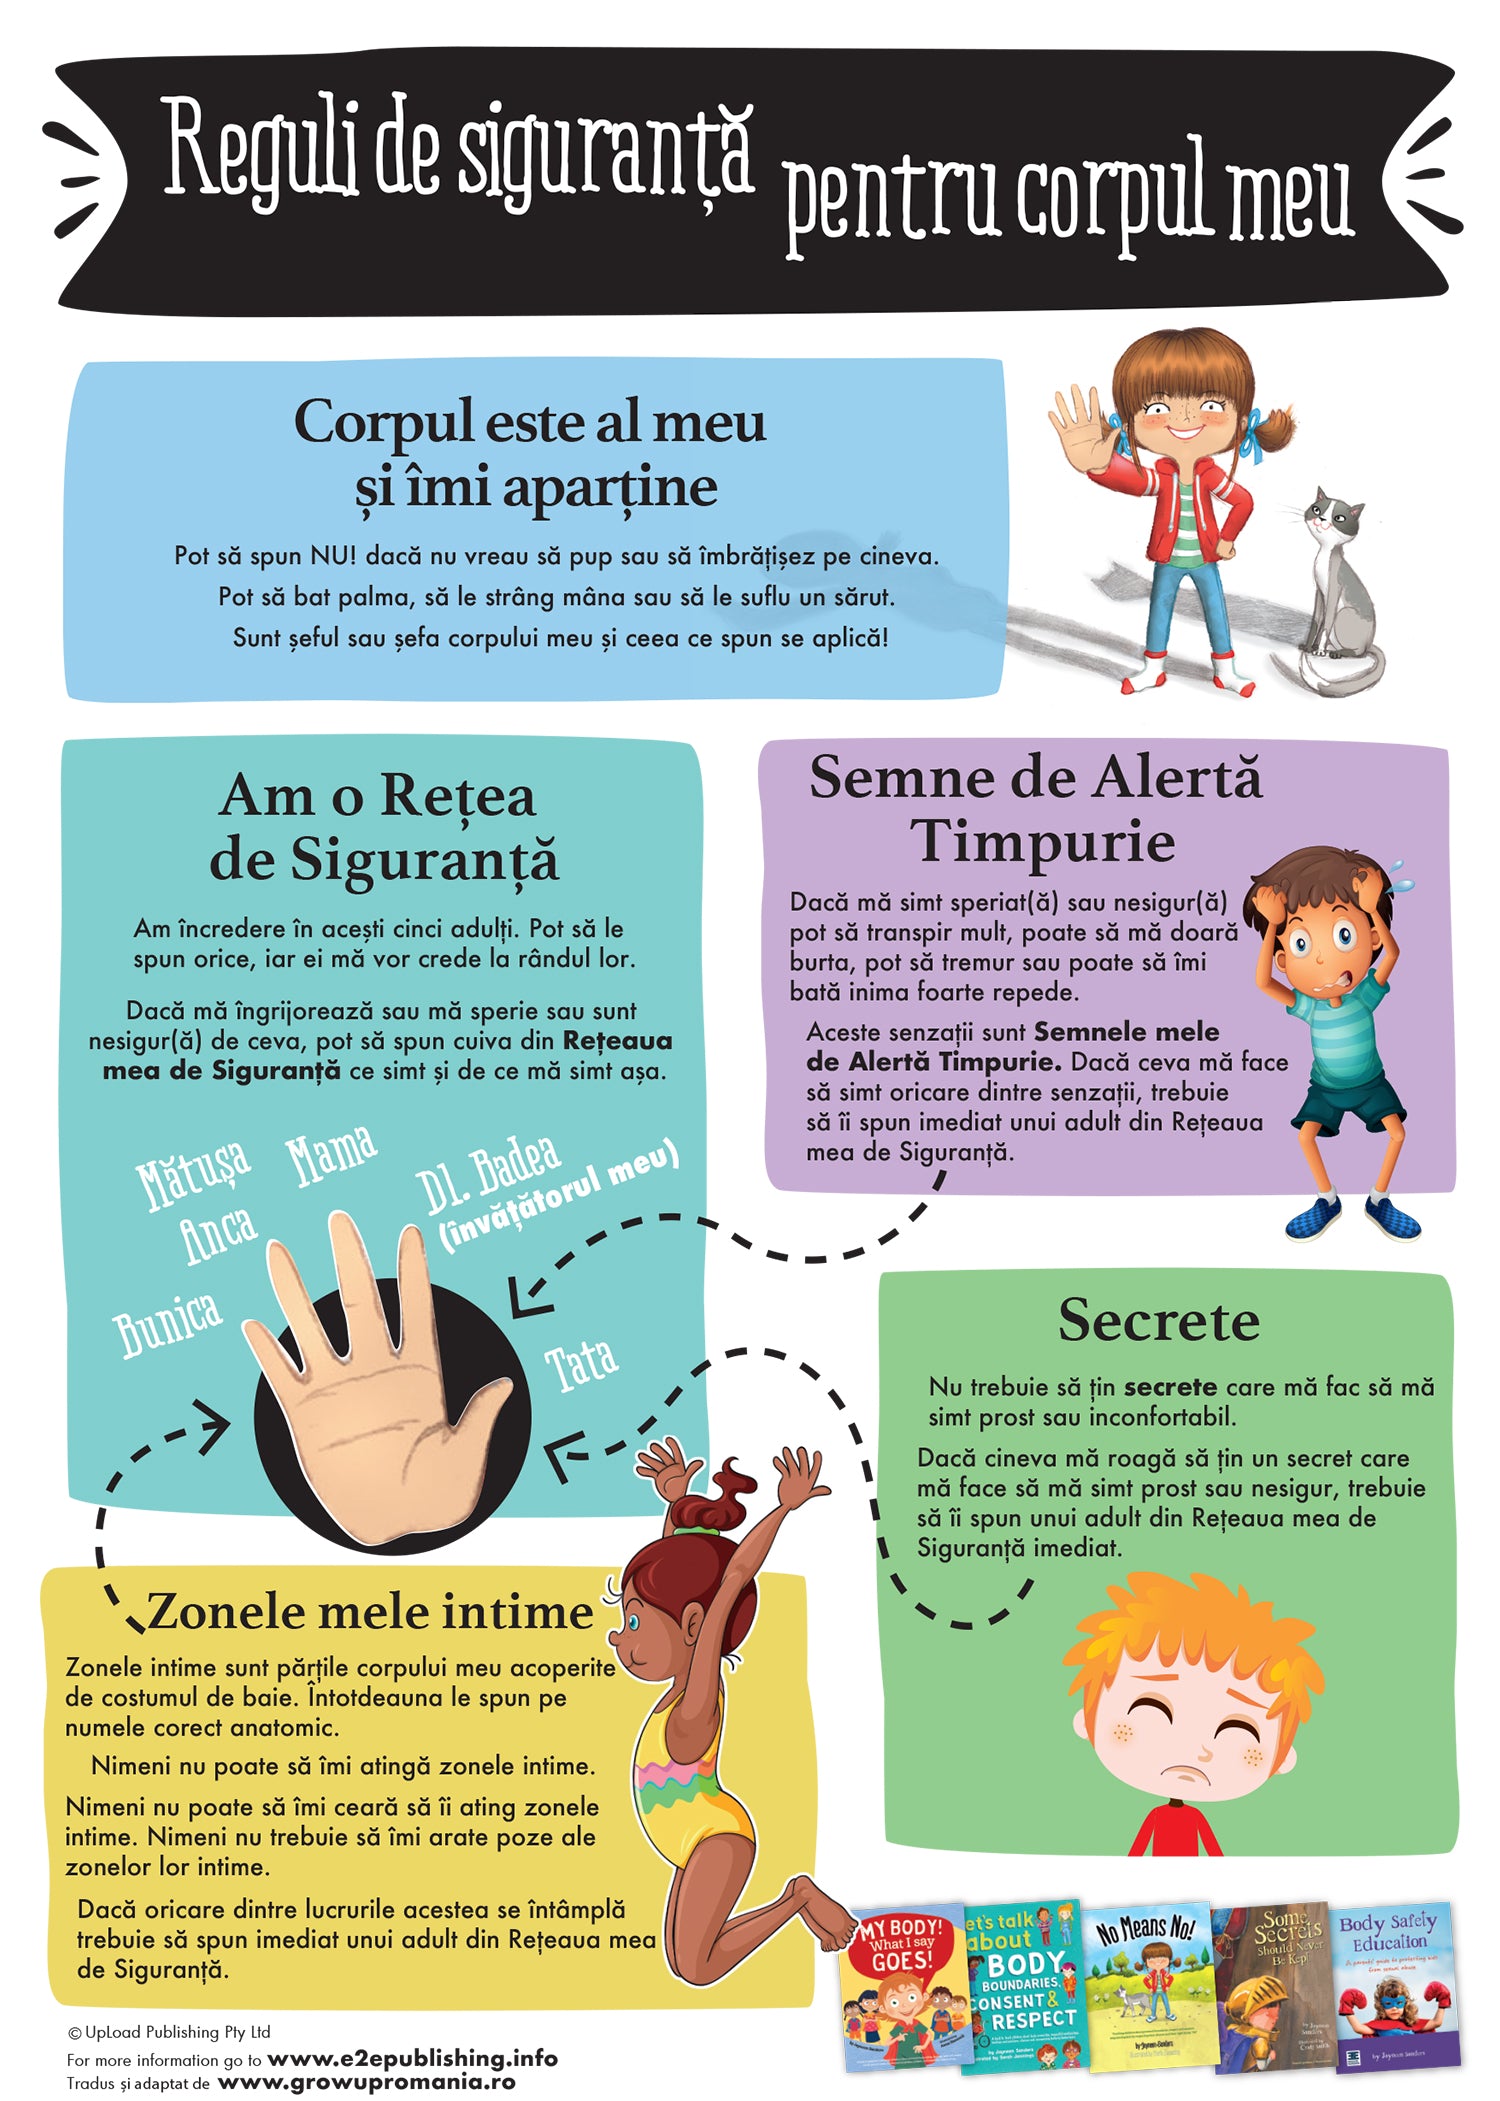 Body Safety Rules poster for children, written in Romanian.